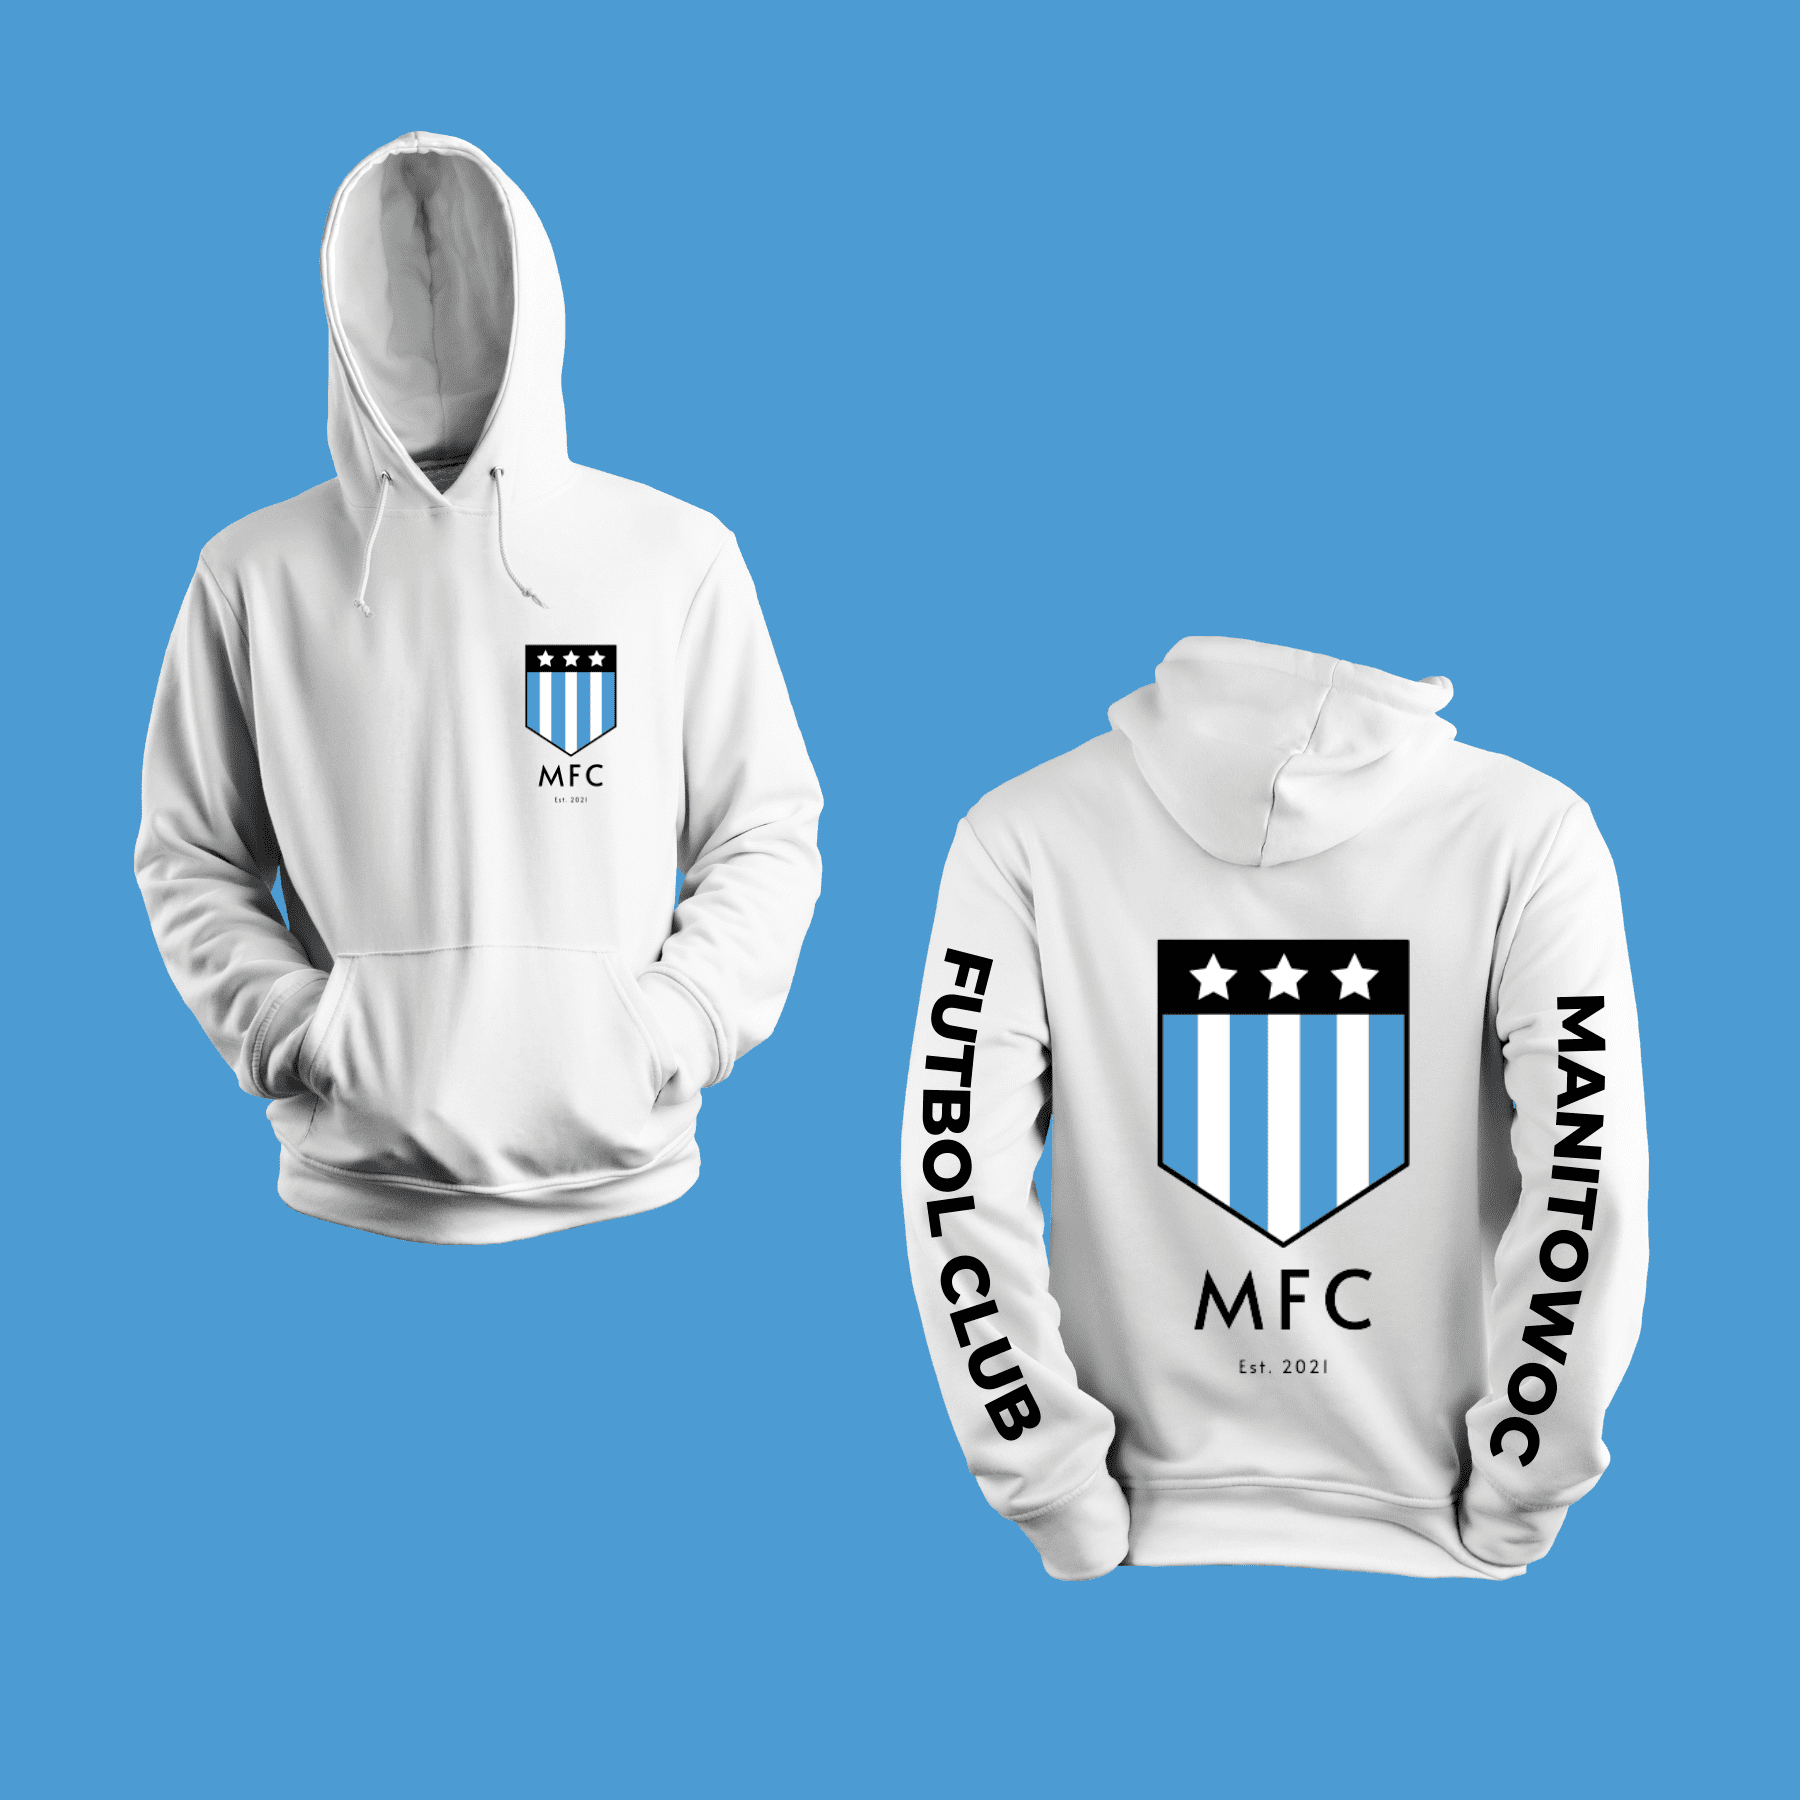 Image shows a white hoodie for the Manitowoc Futbol Club